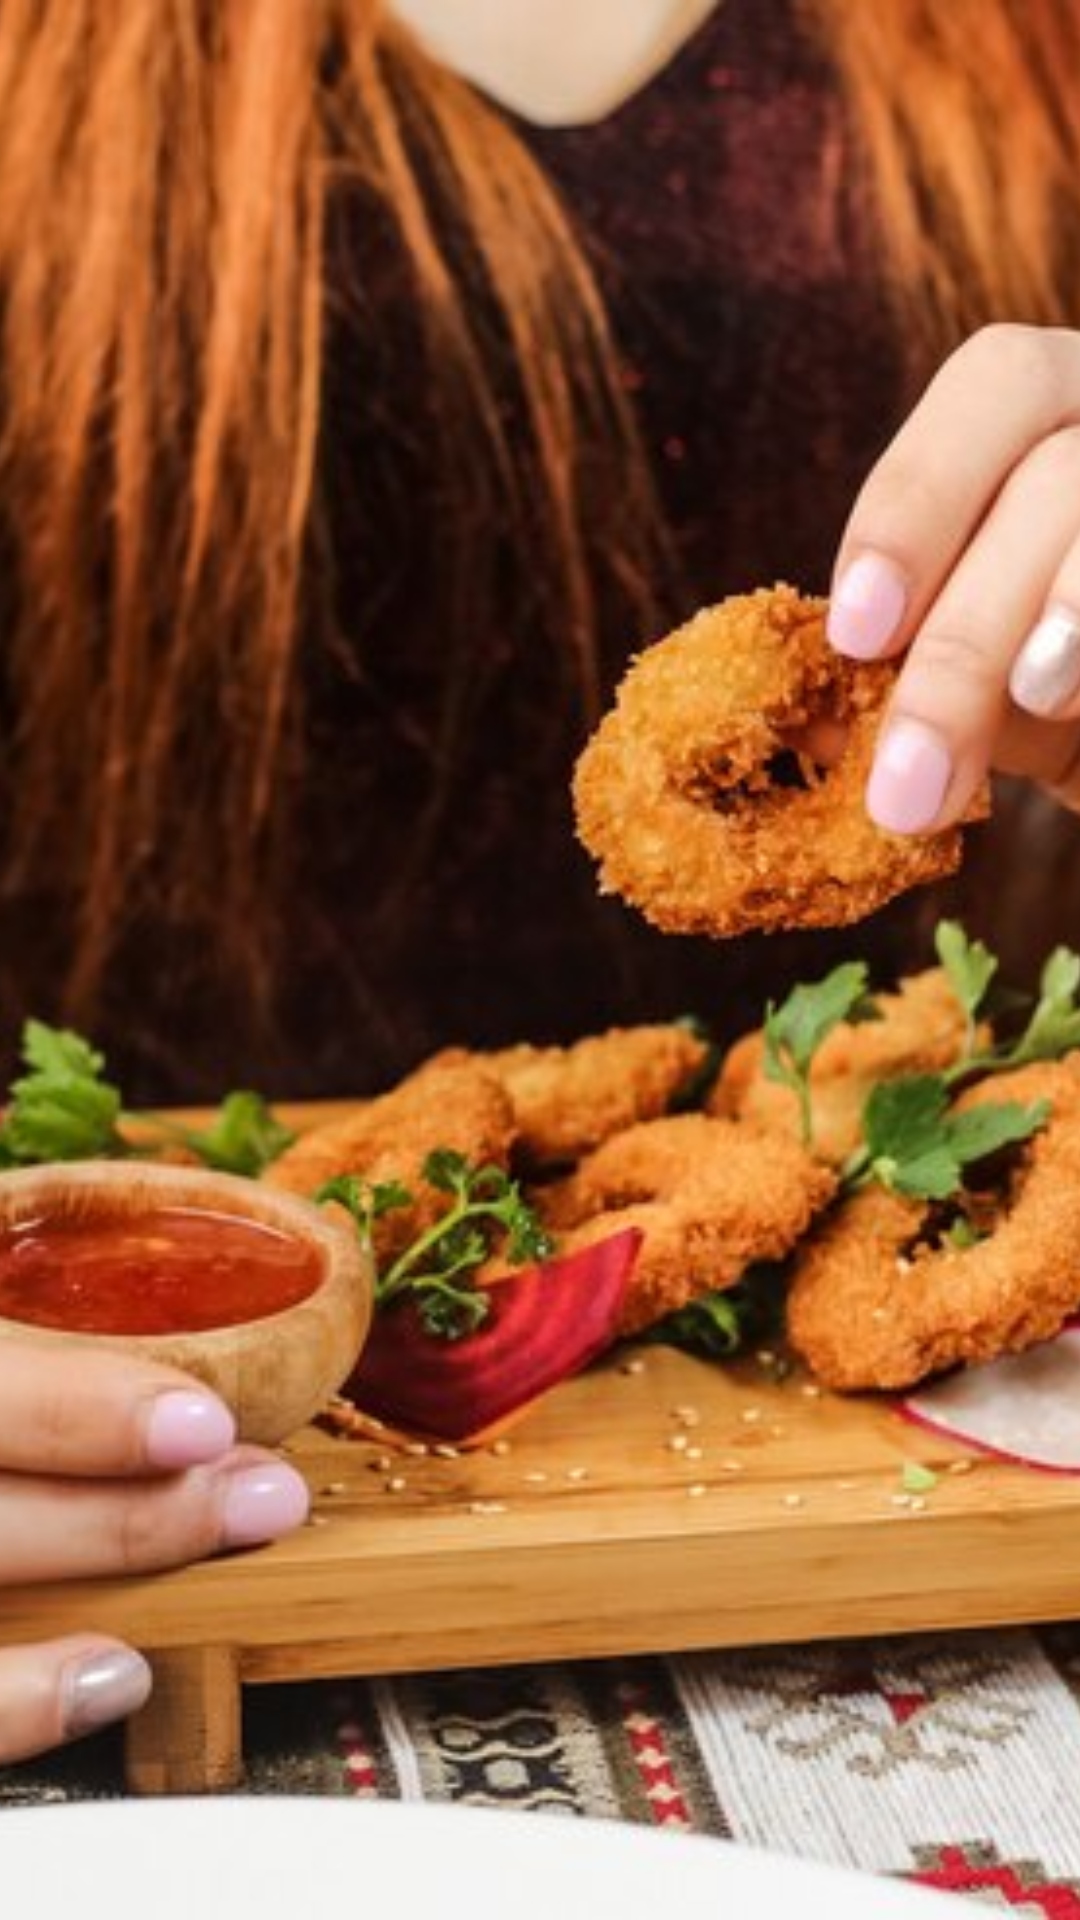 10 Benefits of eating food with your hands